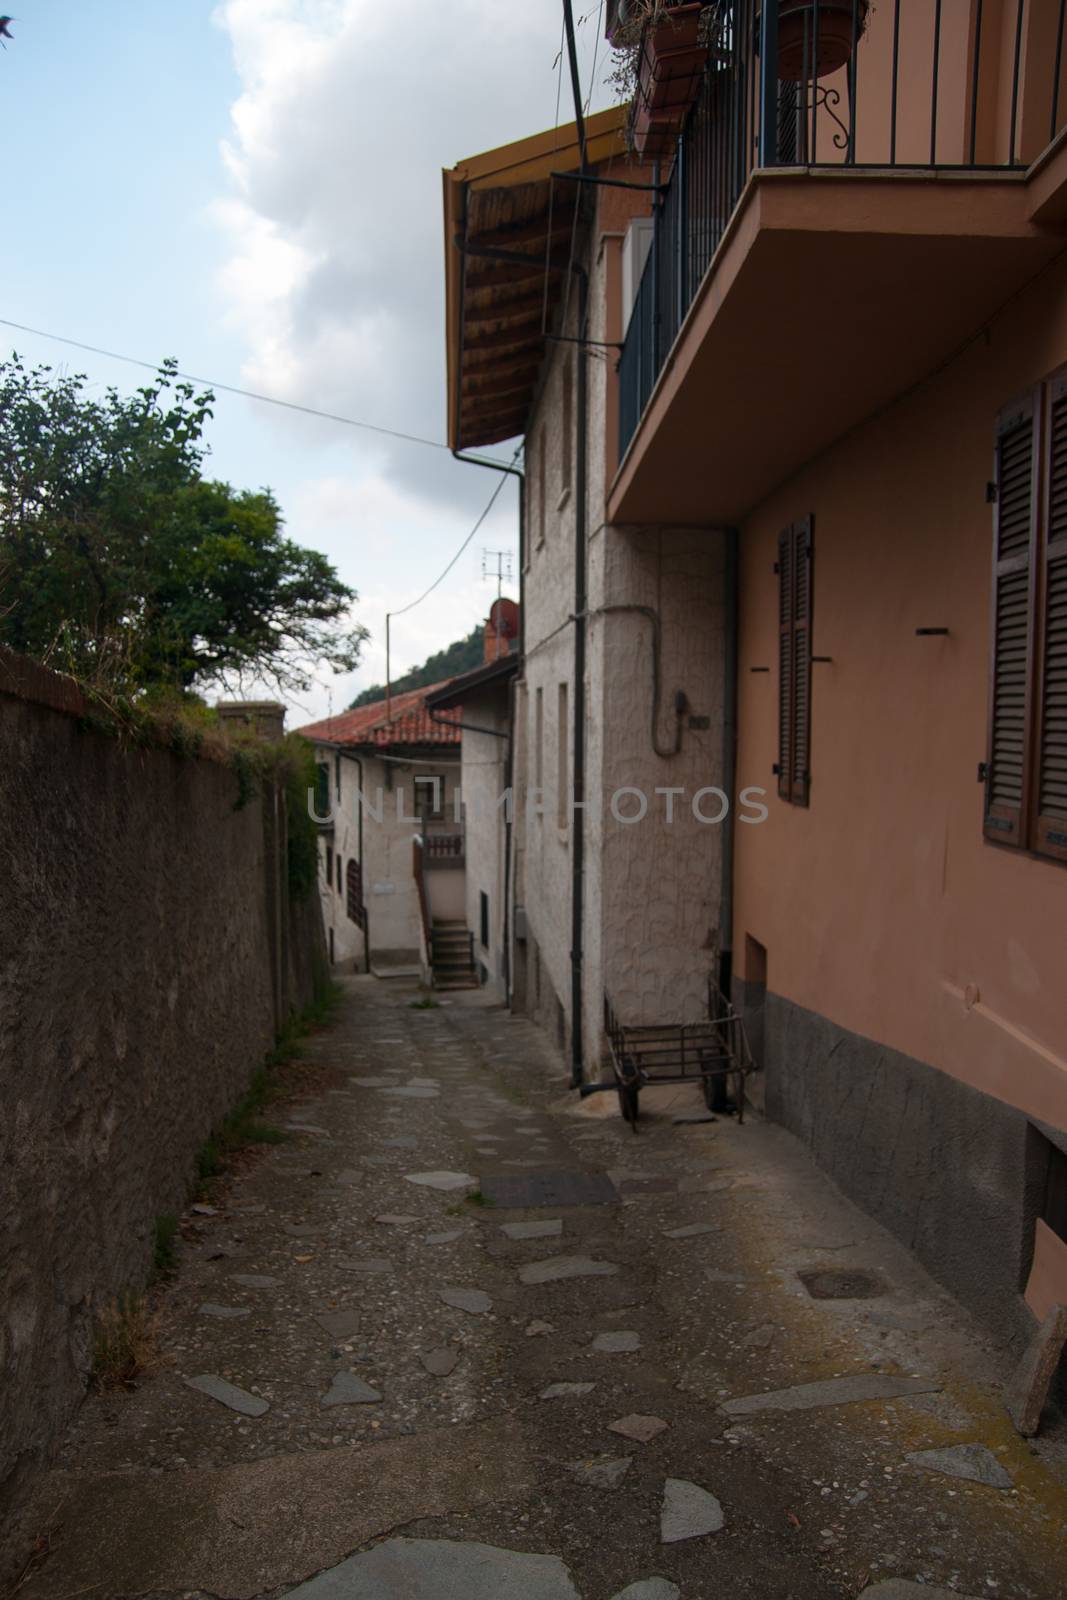 Old houses by javax